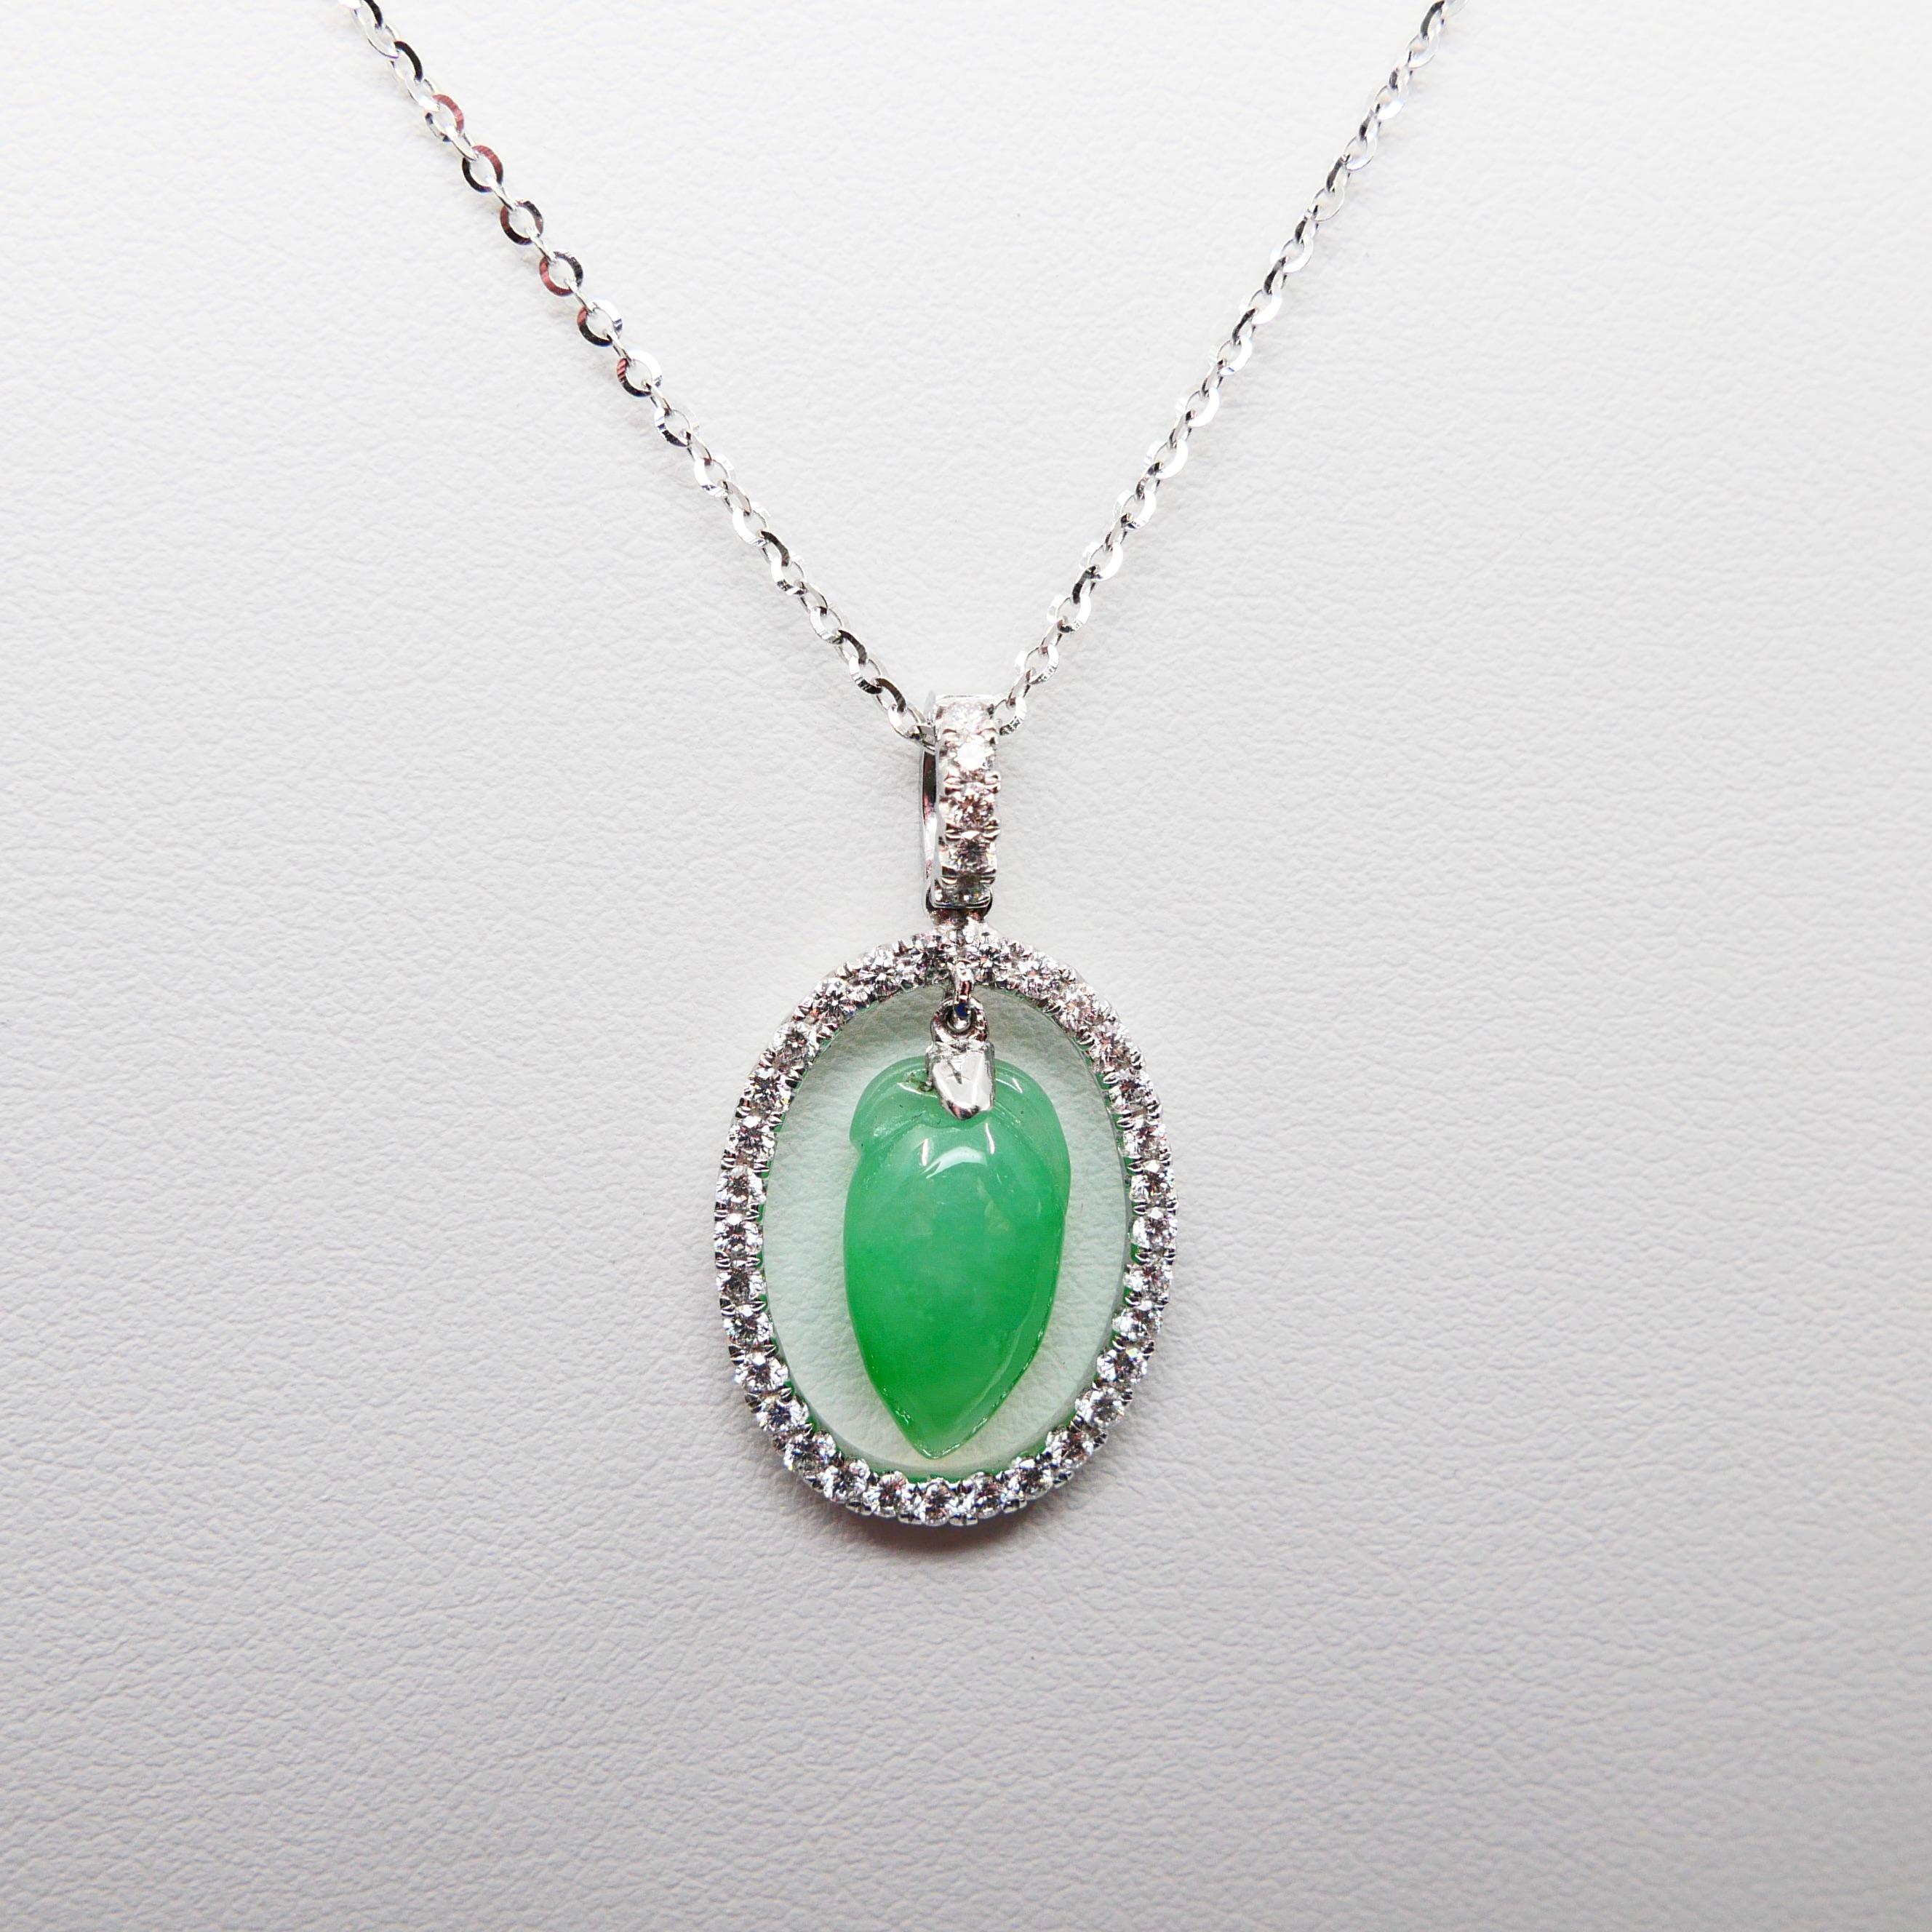 Women's Certified Type A Icy Jade & Diamond Pendant, Apple Green Color, Translucent For Sale